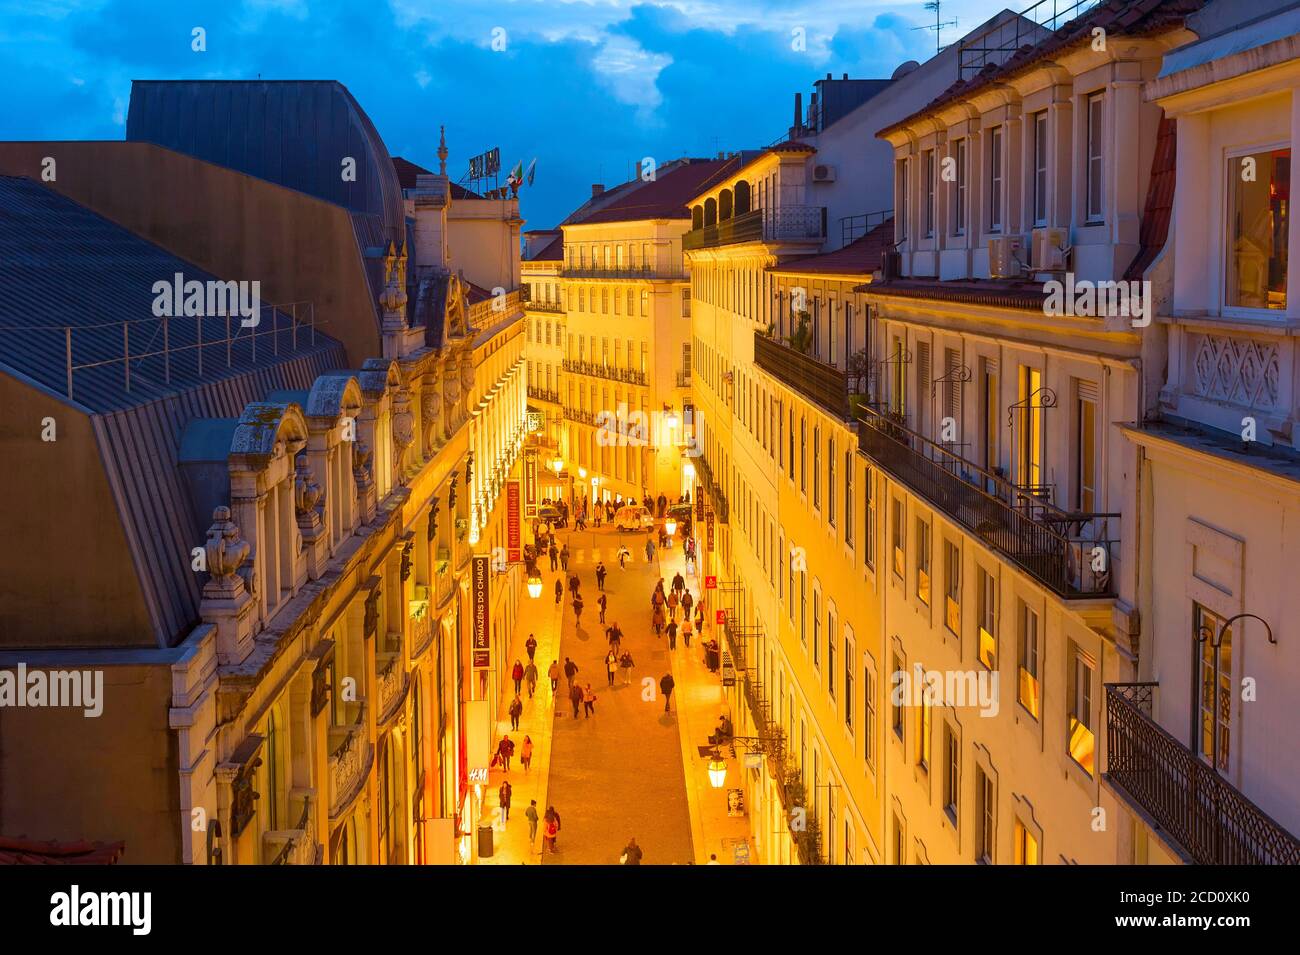 LISBON, PORTUGAL - JANUARY 28, 2020: Aerial view of Old Town shopping street in Lisbon crowded with people. Portugal Stock Photo